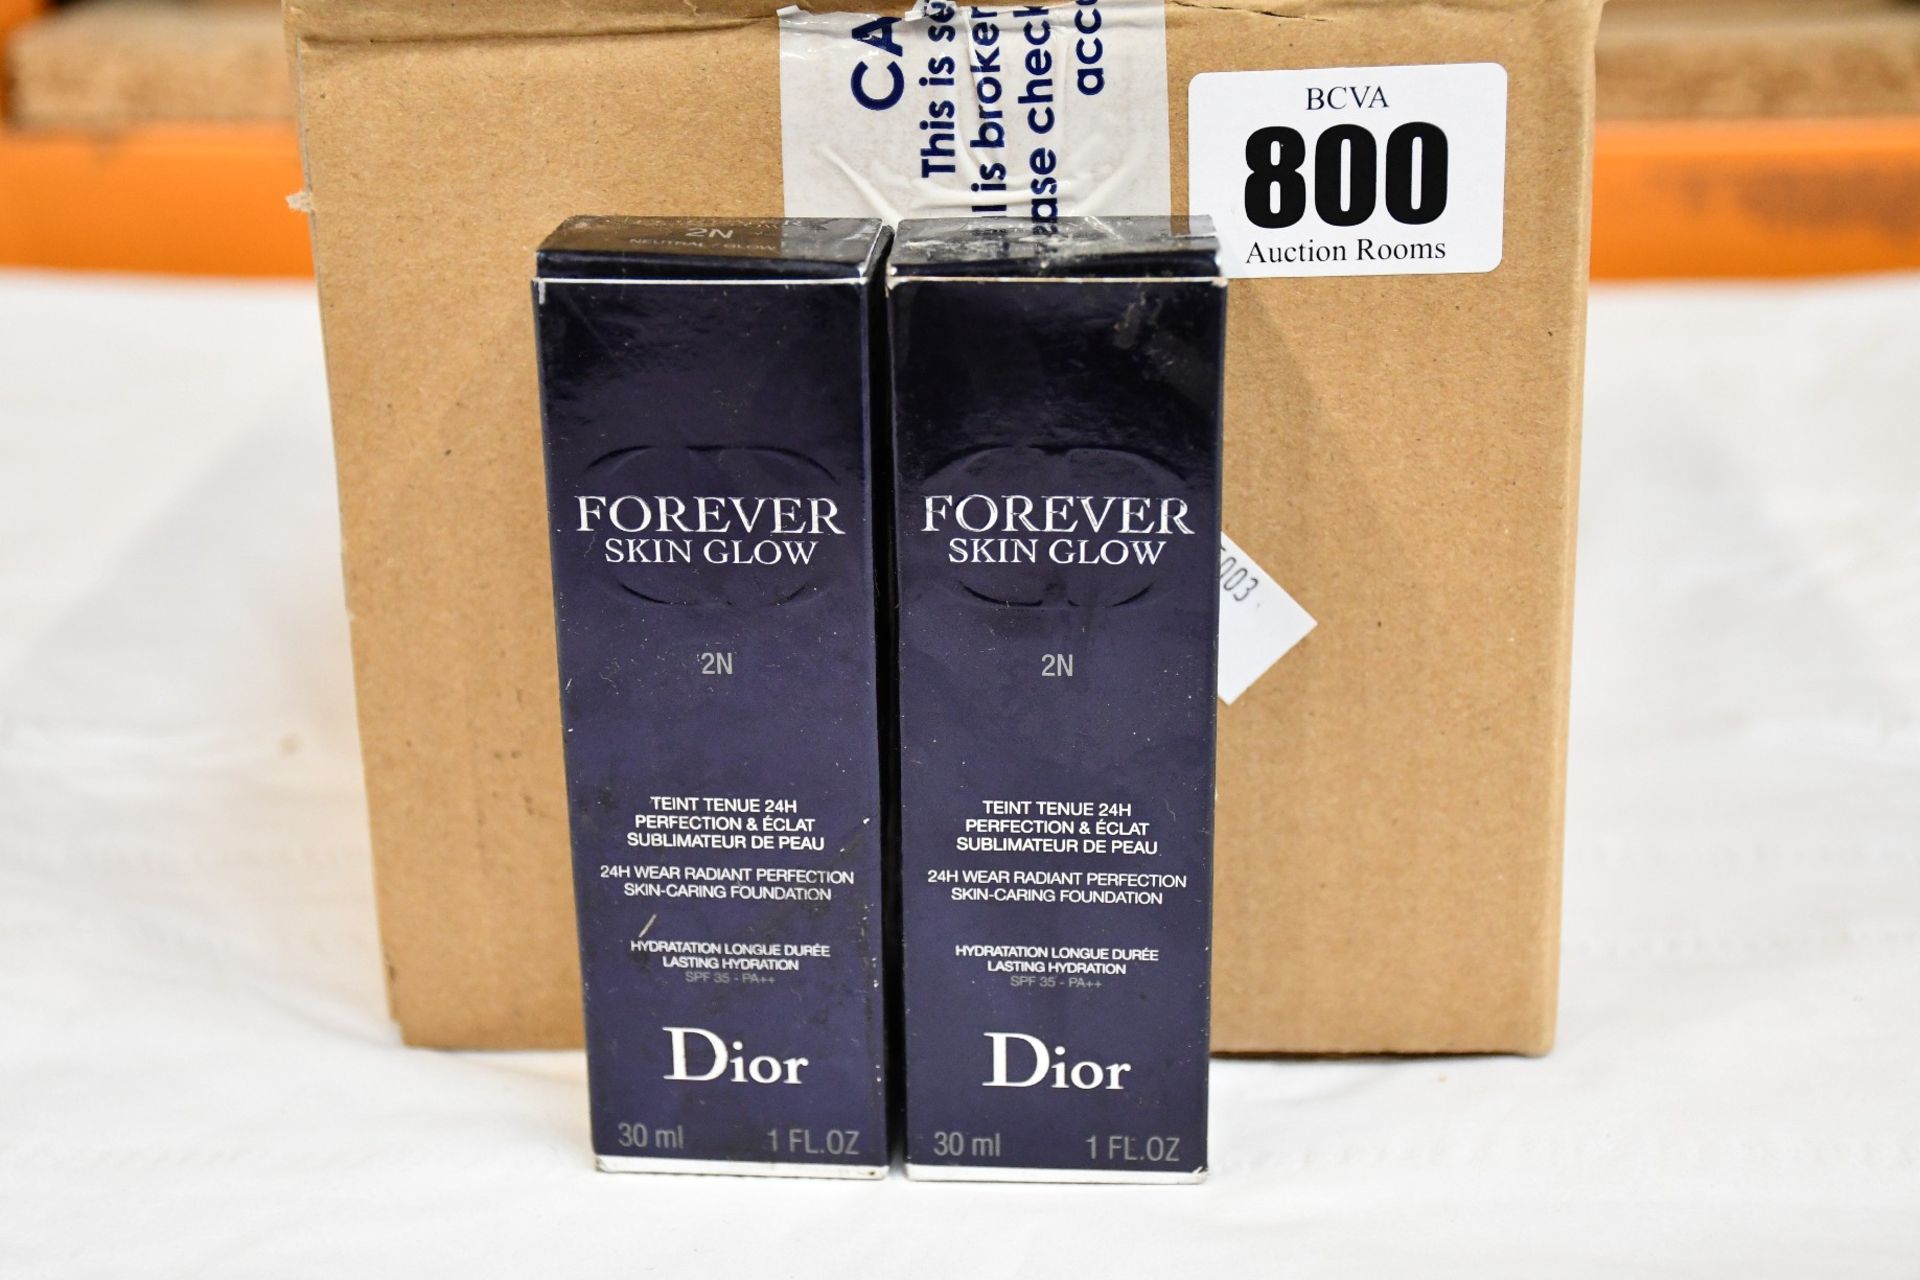 Thirteen Dior Forever skin glow 24h wear radiant perfection skin caring foundation shade 2N (Outer